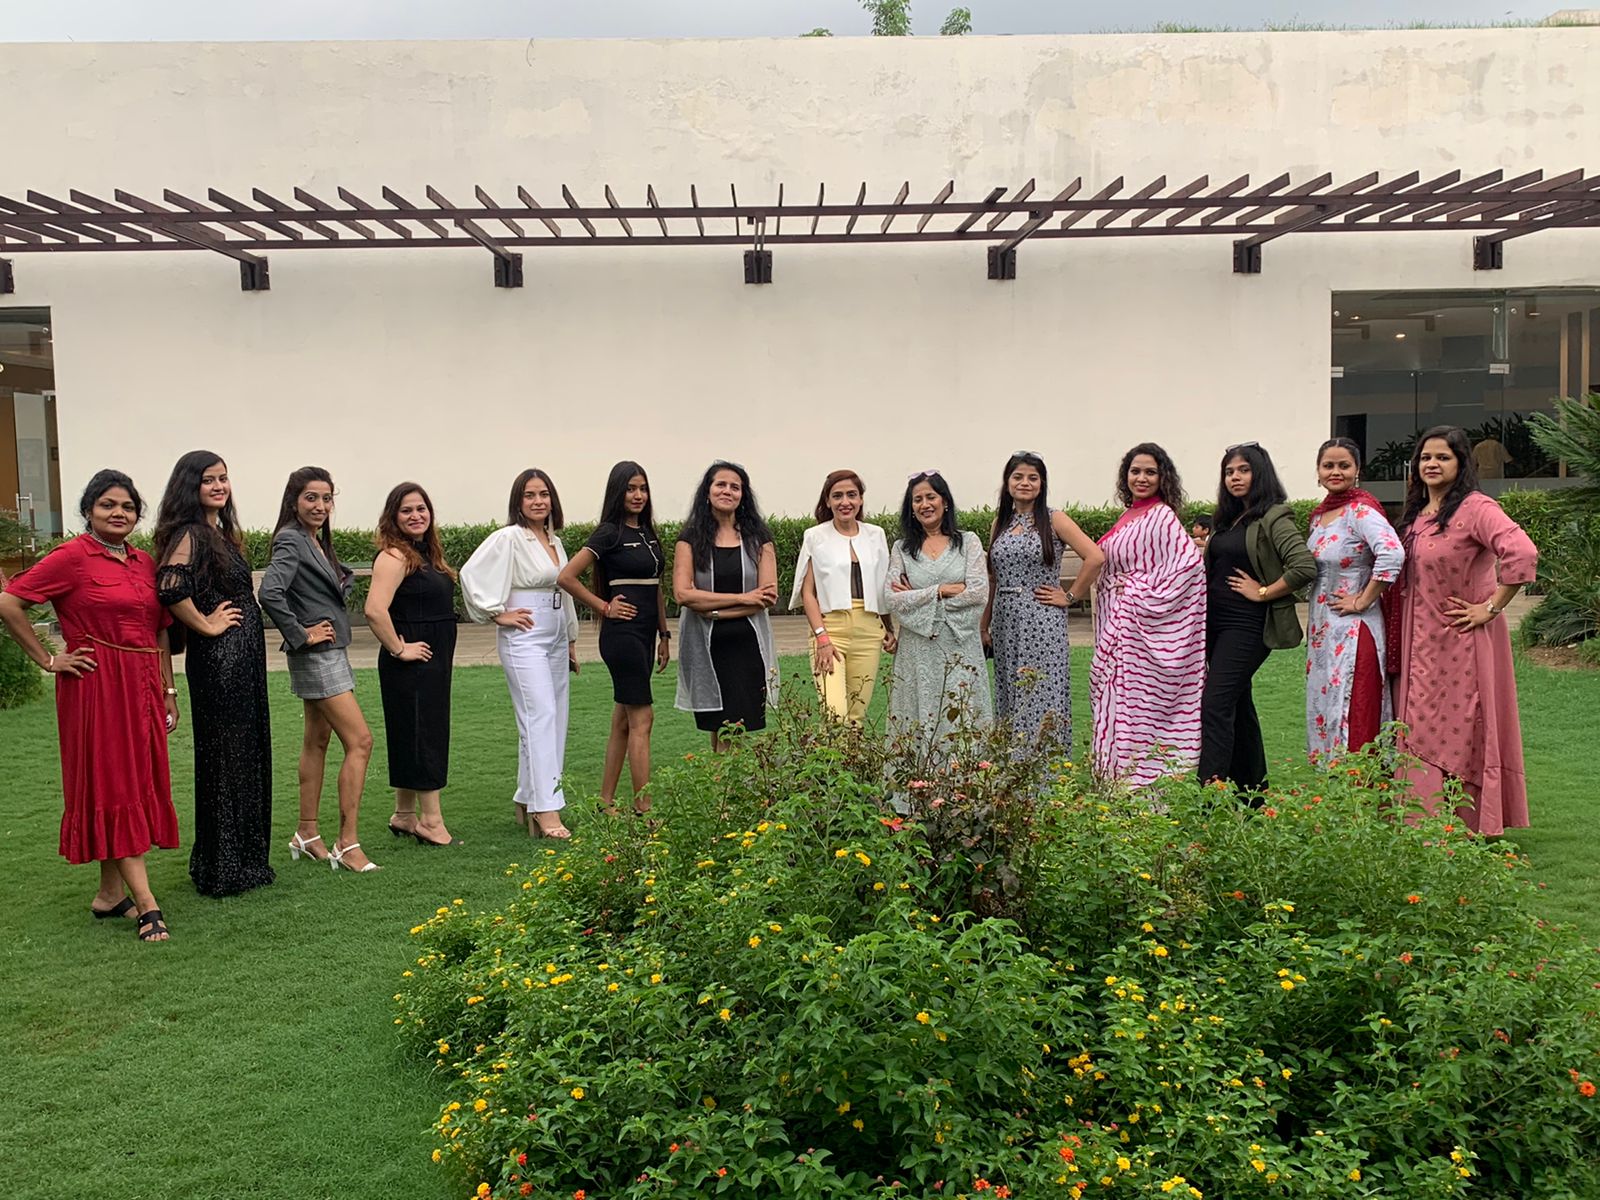 Paramount Golf Forest Organises a special event in honour of empowered women